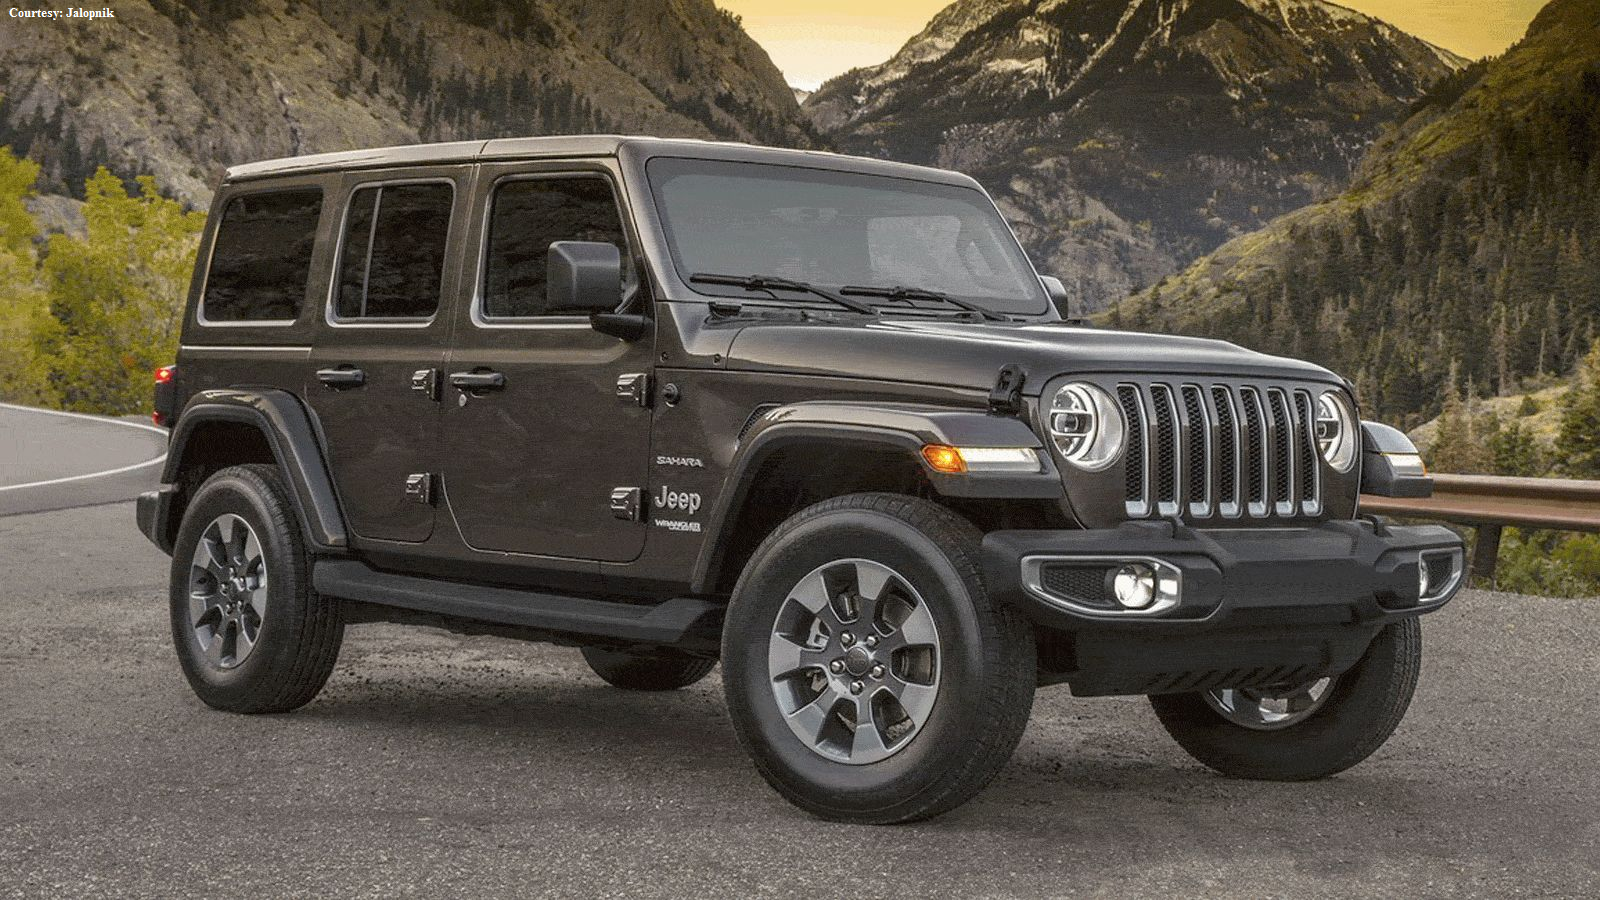 Weekly Slideshow: Efficient and Eco-conscious Design Choices in the Jeep  Wrangler | Jk-forum